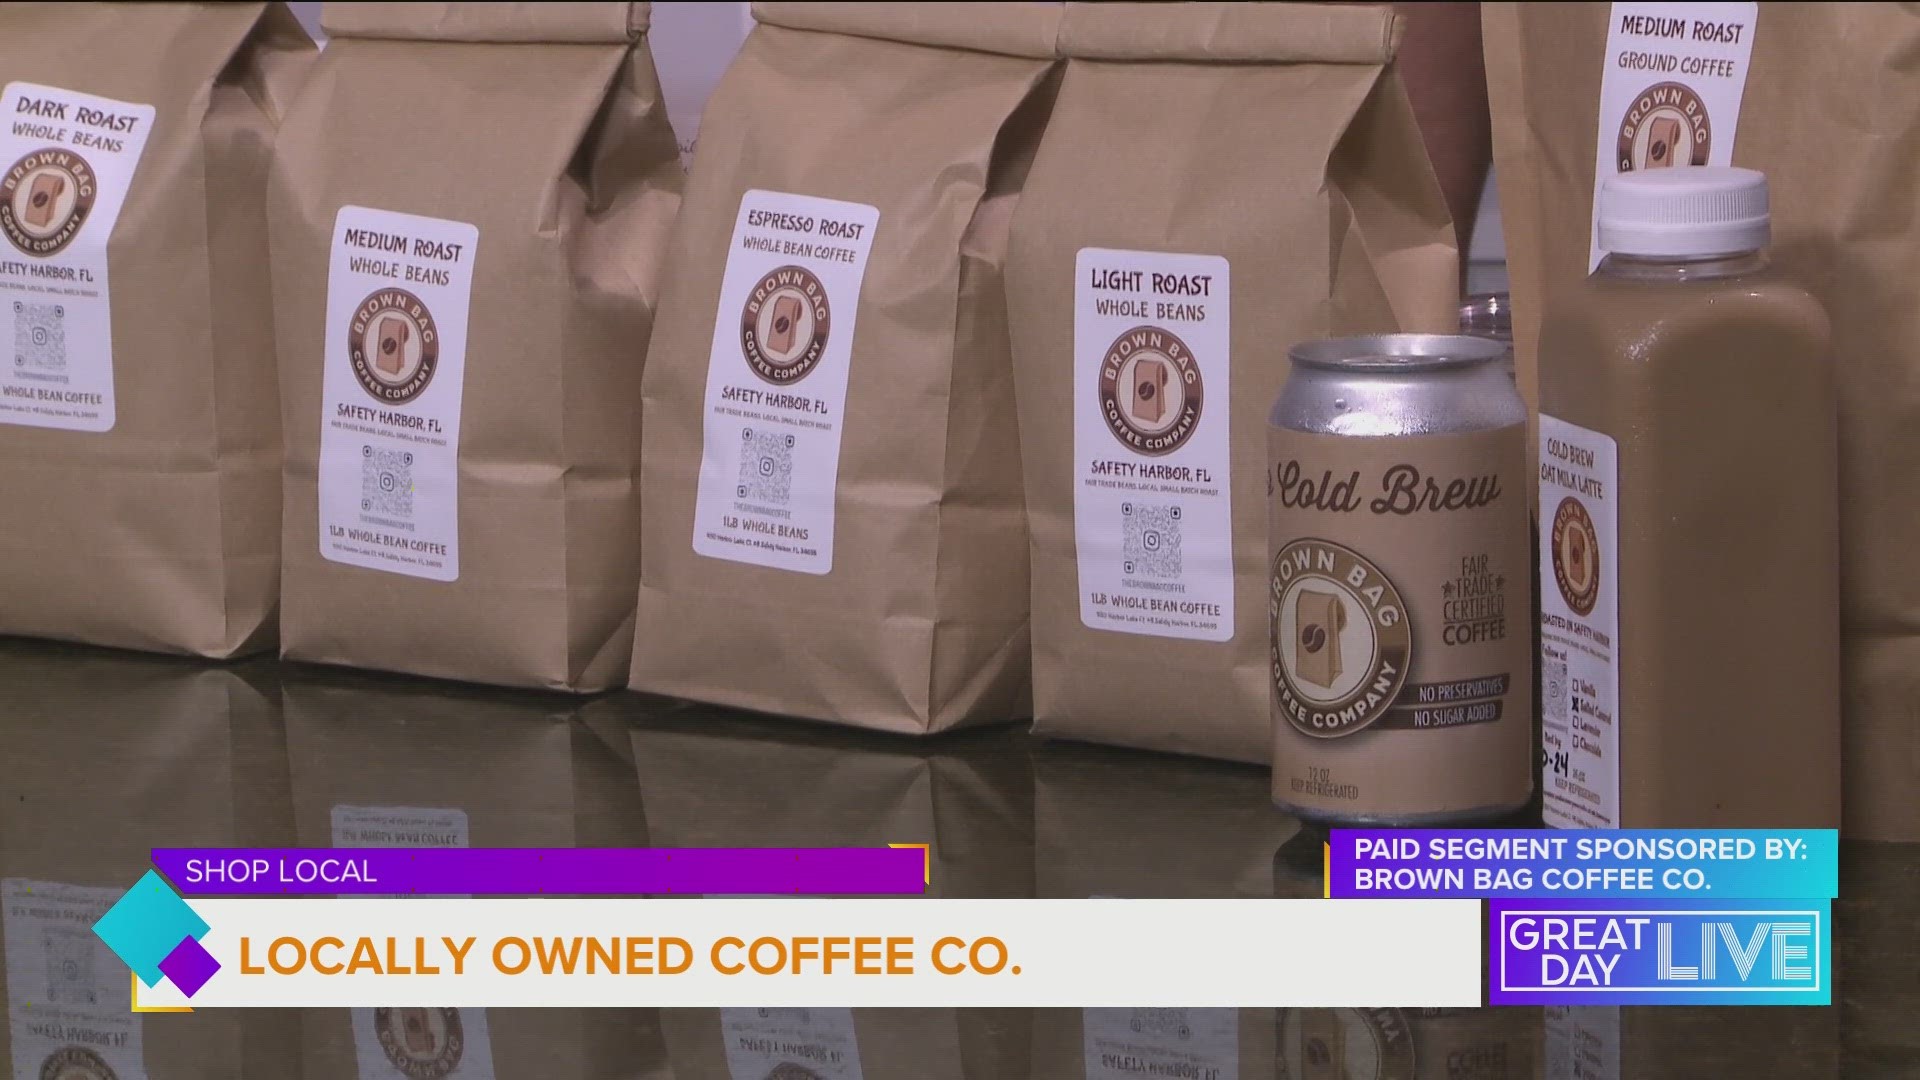 This story sponsored by: Brown Bag Coffee Company; This Safety Harbor roaster served up some of their award winning cold brew coffee to GDL.